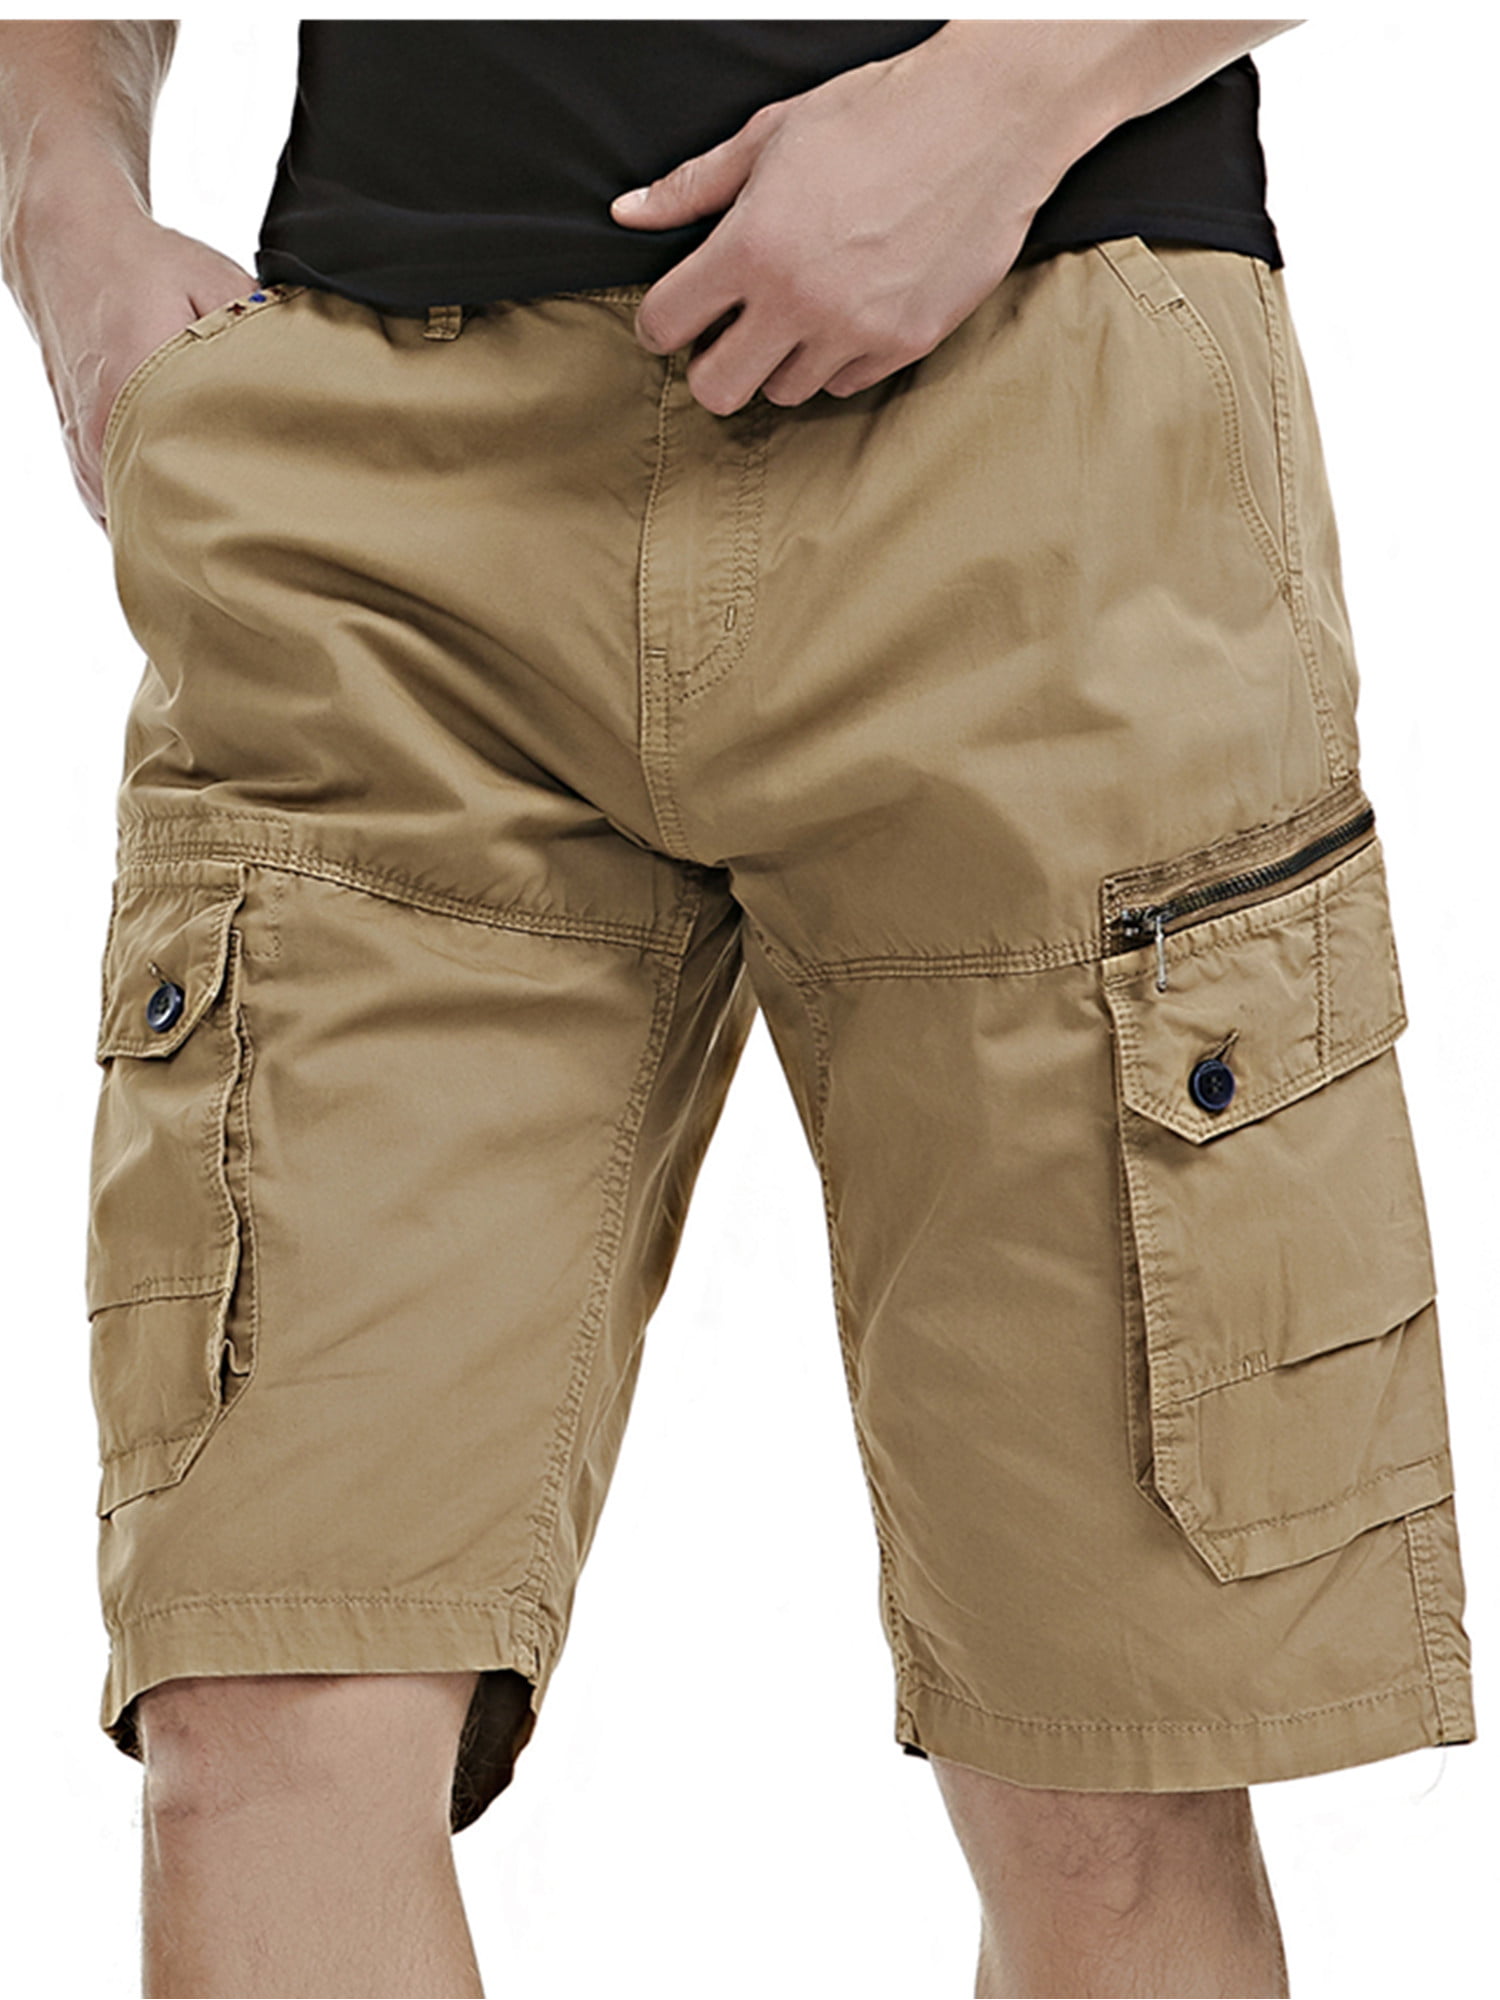 Quick Dry Shorts Men's Outdoor Summer Lightweight Cargo Causal Hiking Fishing Utility Short with Multi-Pocket 